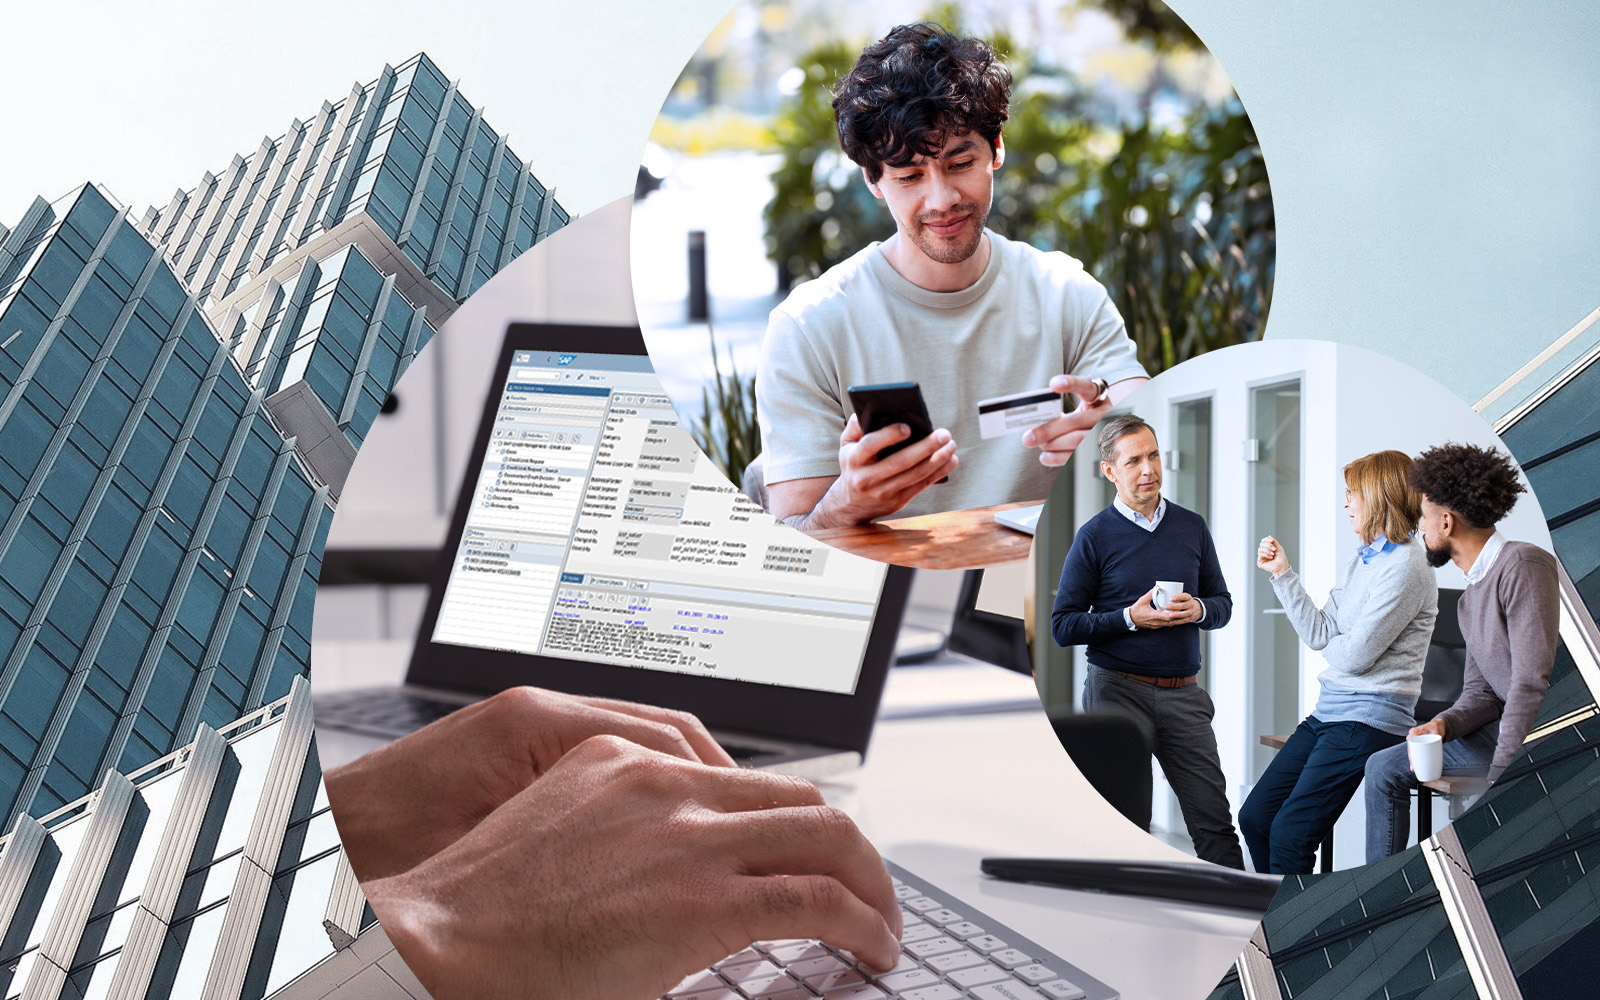 Image of people in a conversation, person with cell phone and credit card in hand, next to it person typing on a laptop, SAP Credit Management